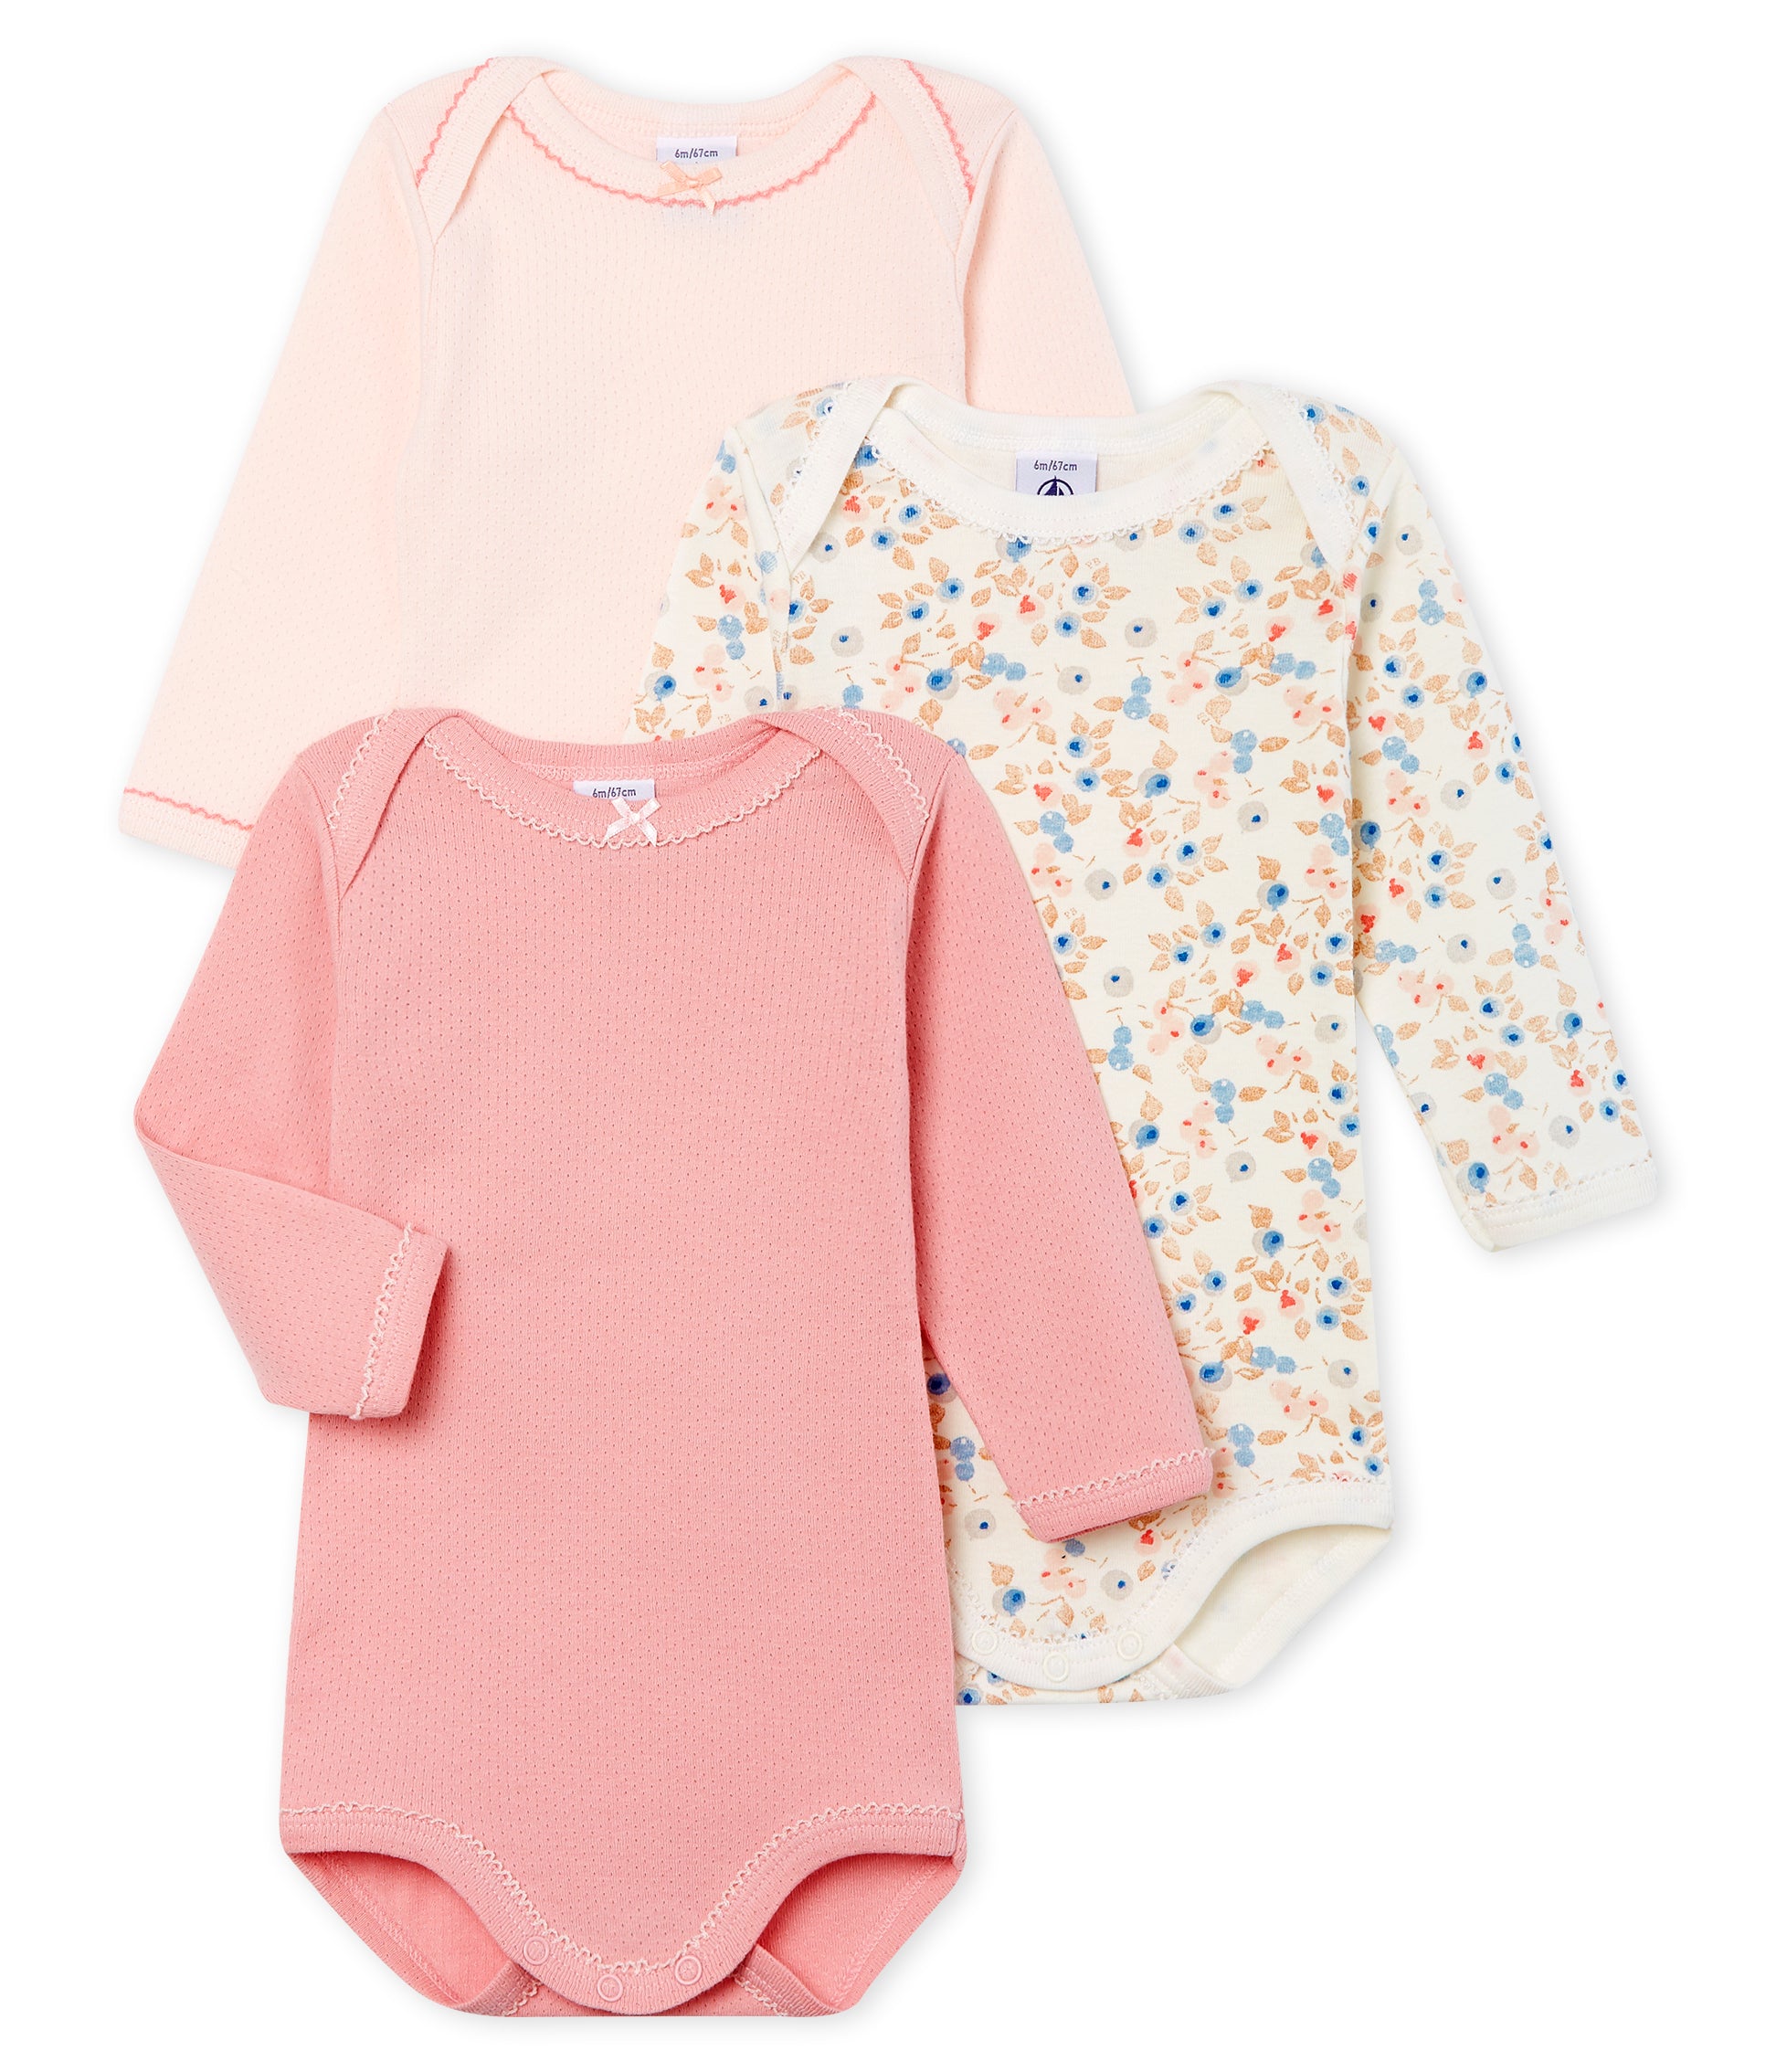 Baby Girls Multicolor Cotton Sets